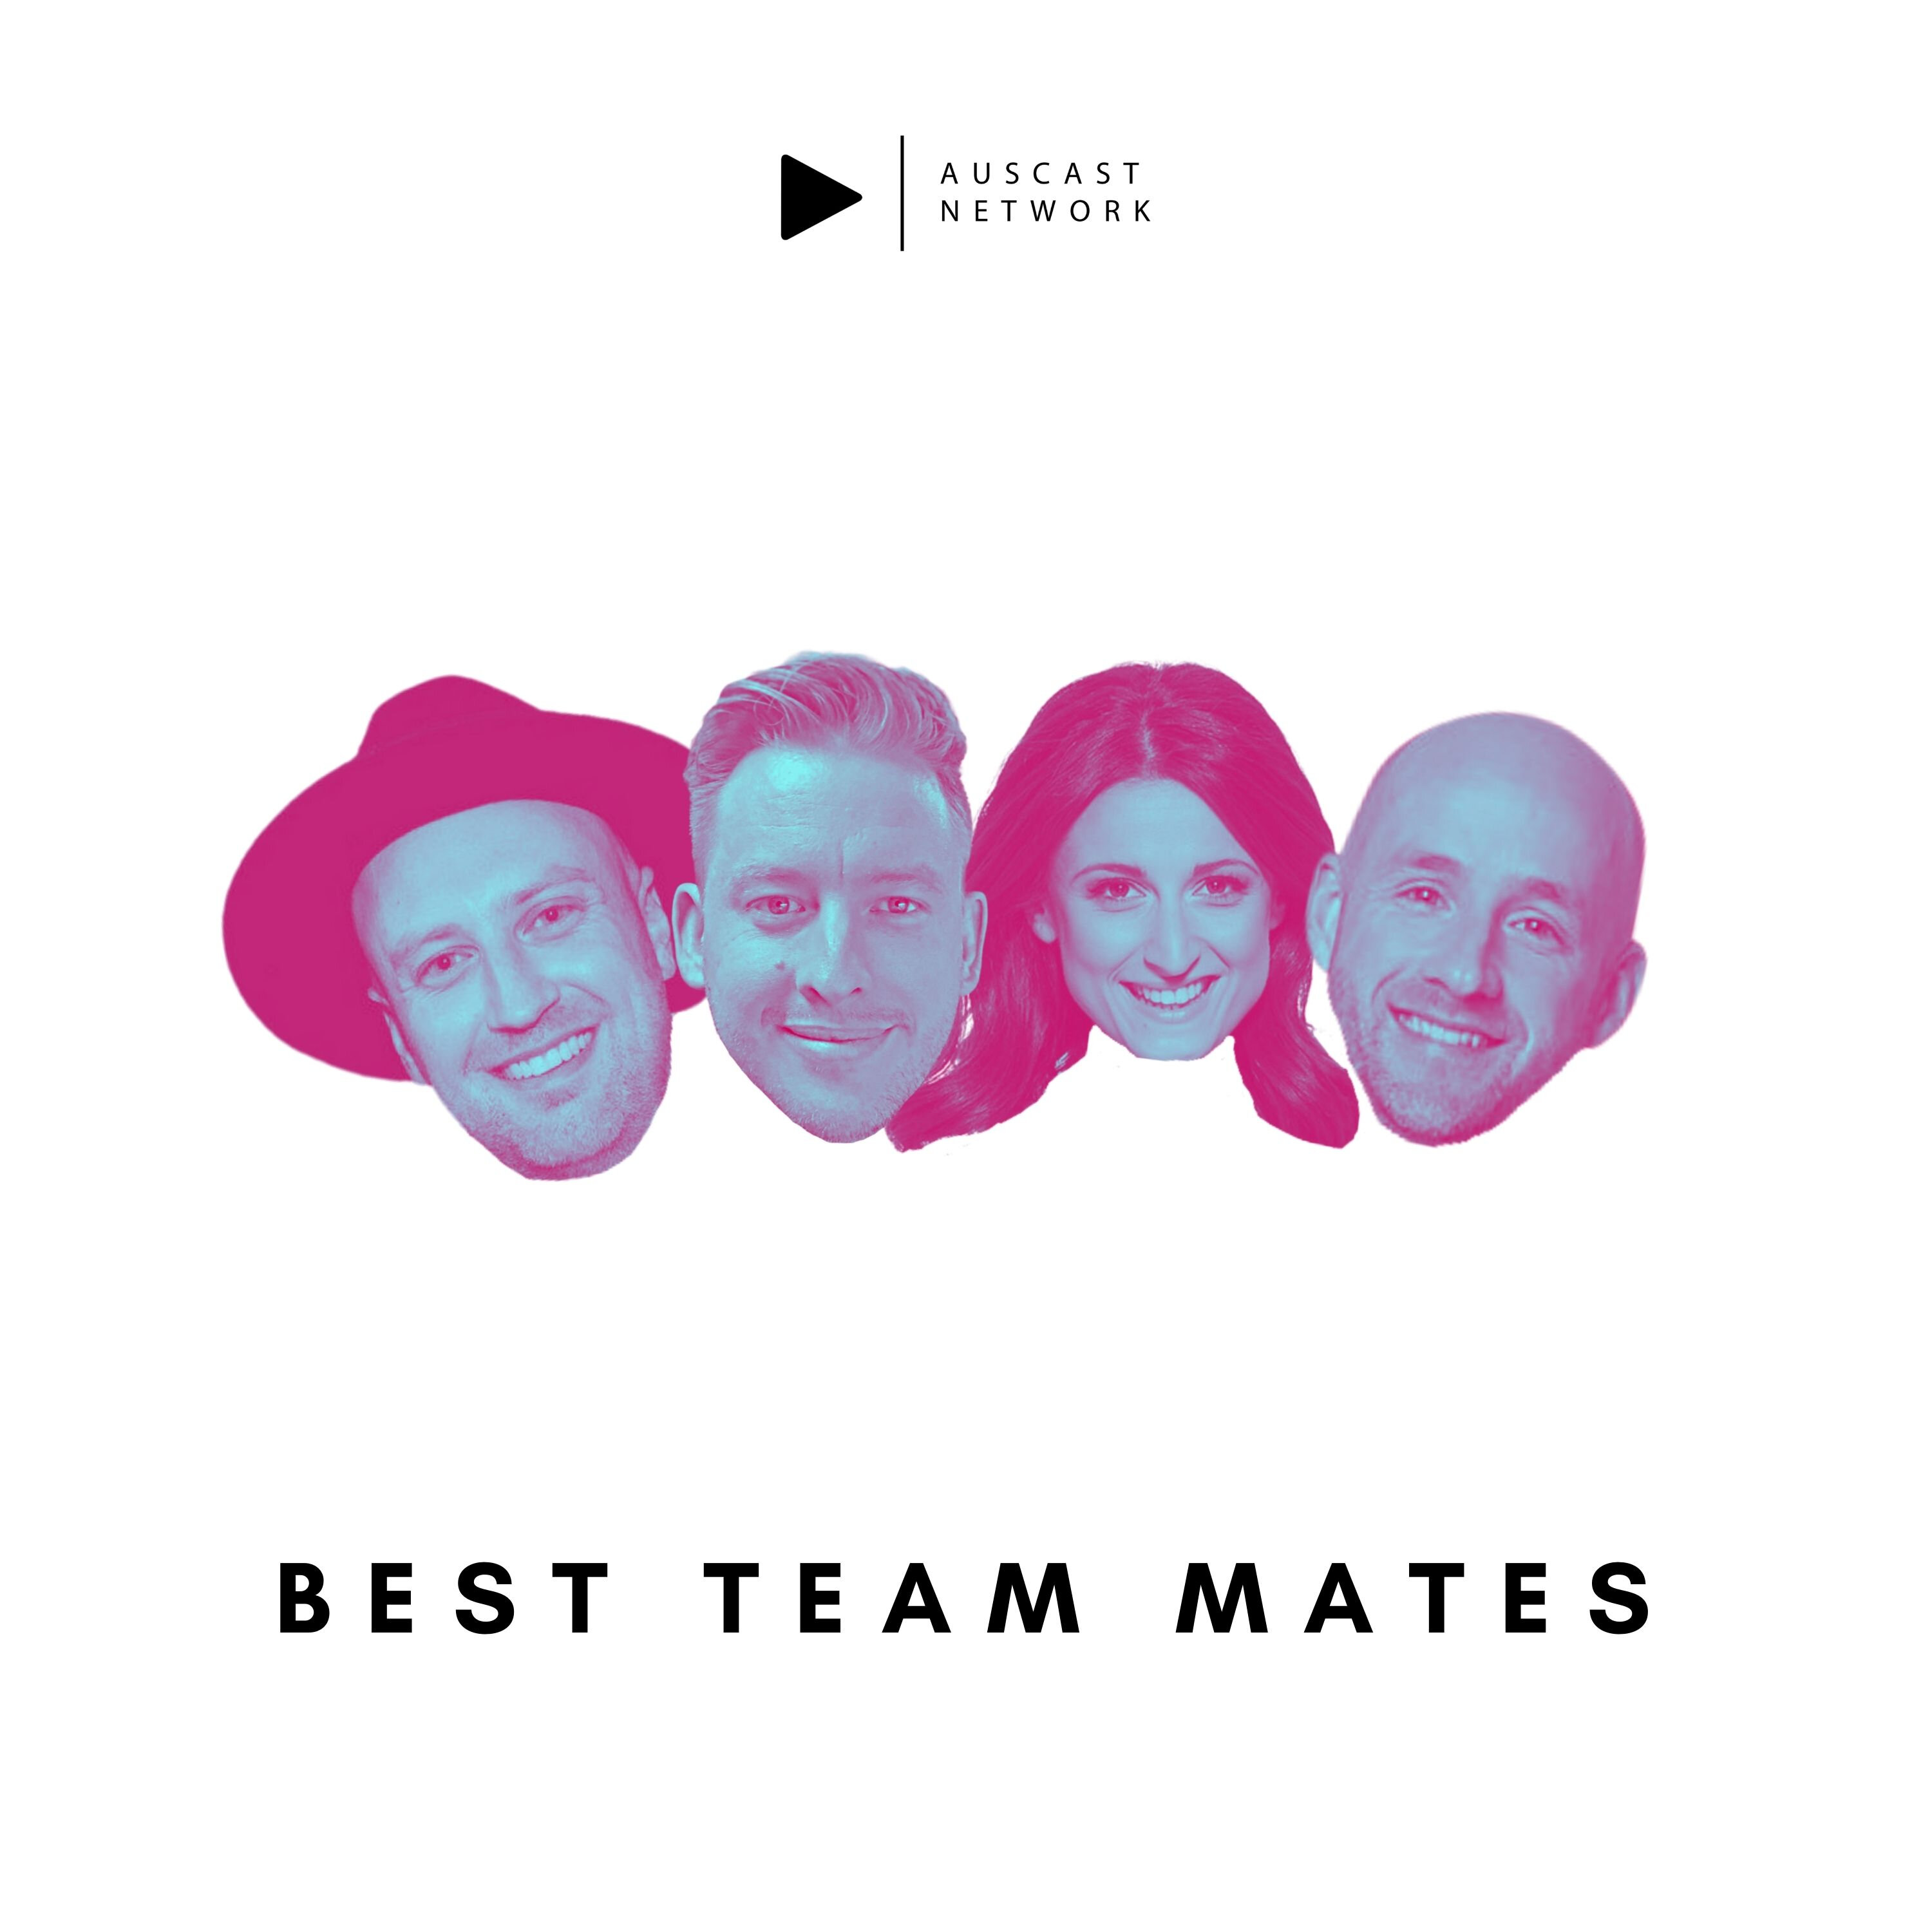 Rosie and Andy Solo, FIFA Women's World Cup, The Barbie Movie, Pooping in studio + more - Best Team Mates